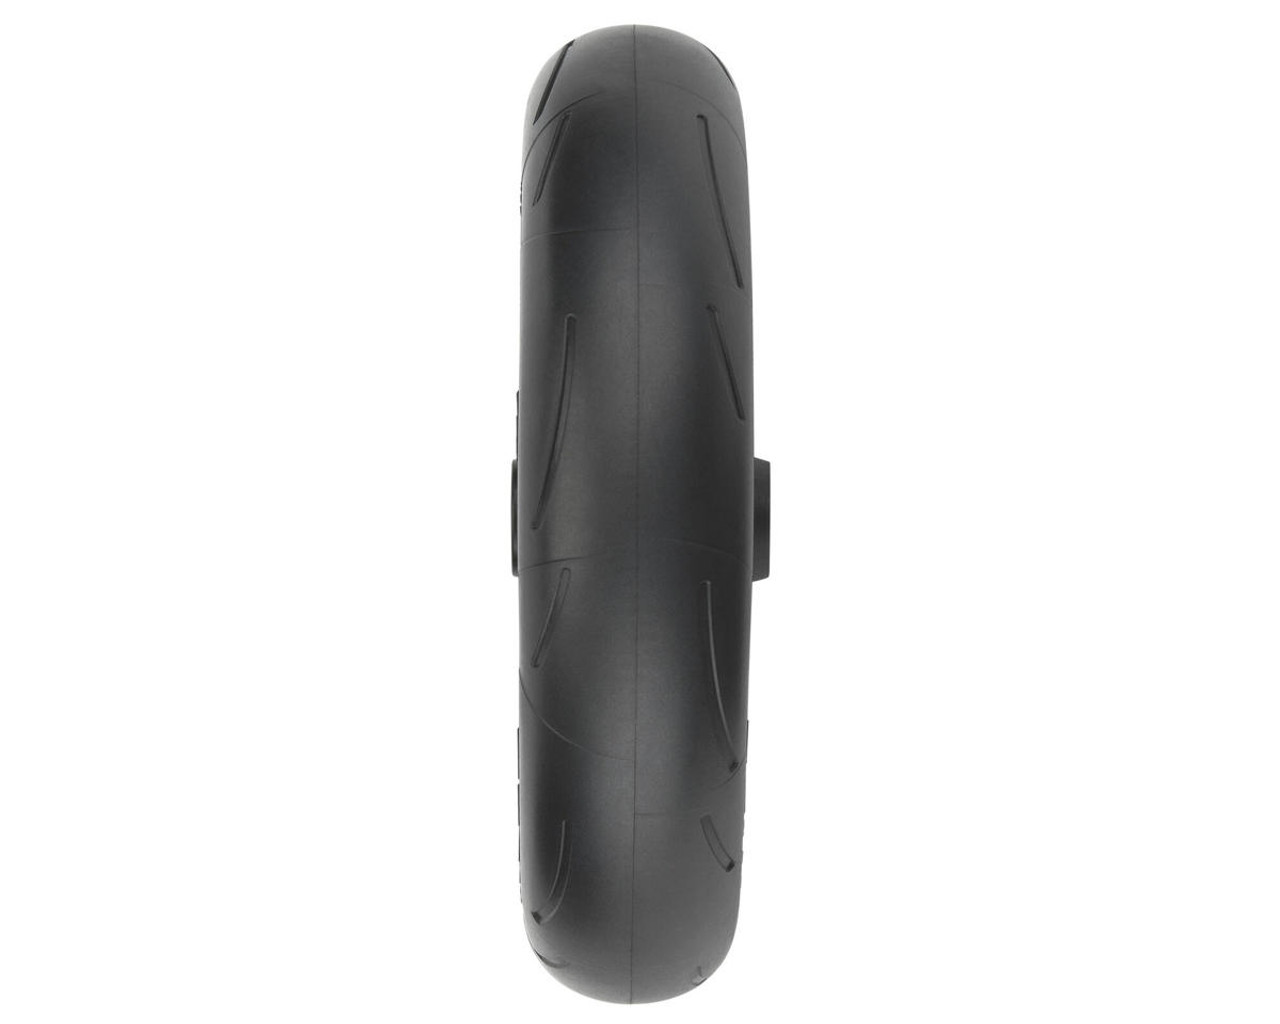 Pro-Line 1/4 Supermoto Motorcycle Front Tire Pre-Mounted (Black) (1) (S3)